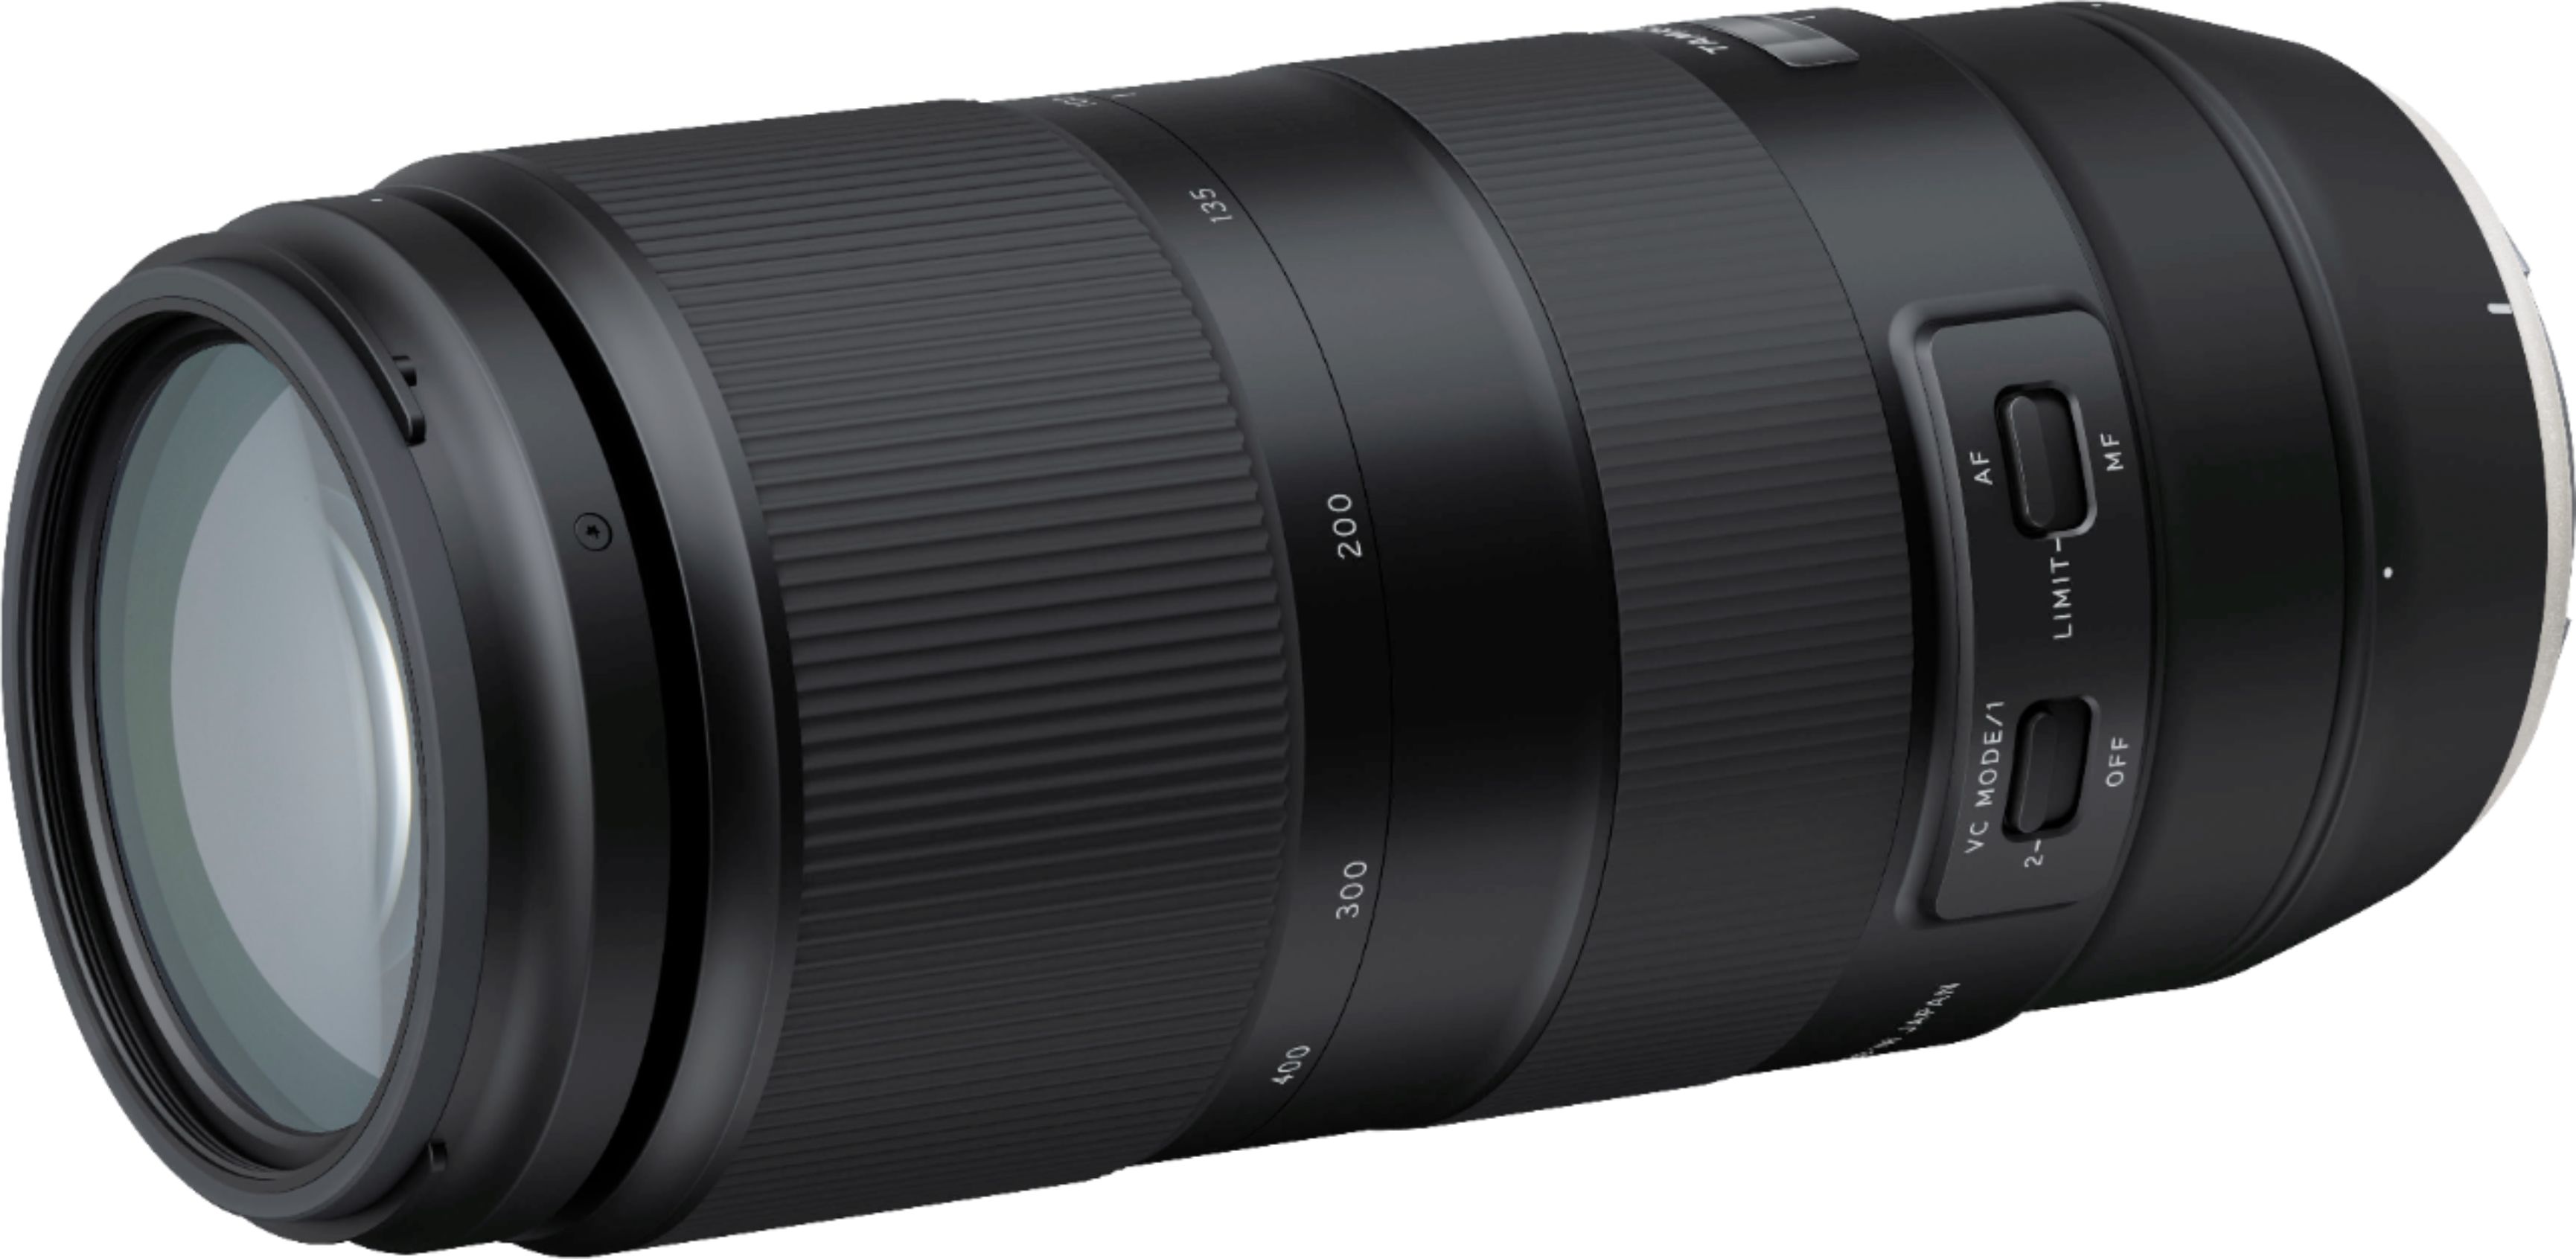 Angle View: Tamron - 100-400mm F/4.5-6.3 Di VC USD Telephoto Zoom Lens for Canon DSLR cameras